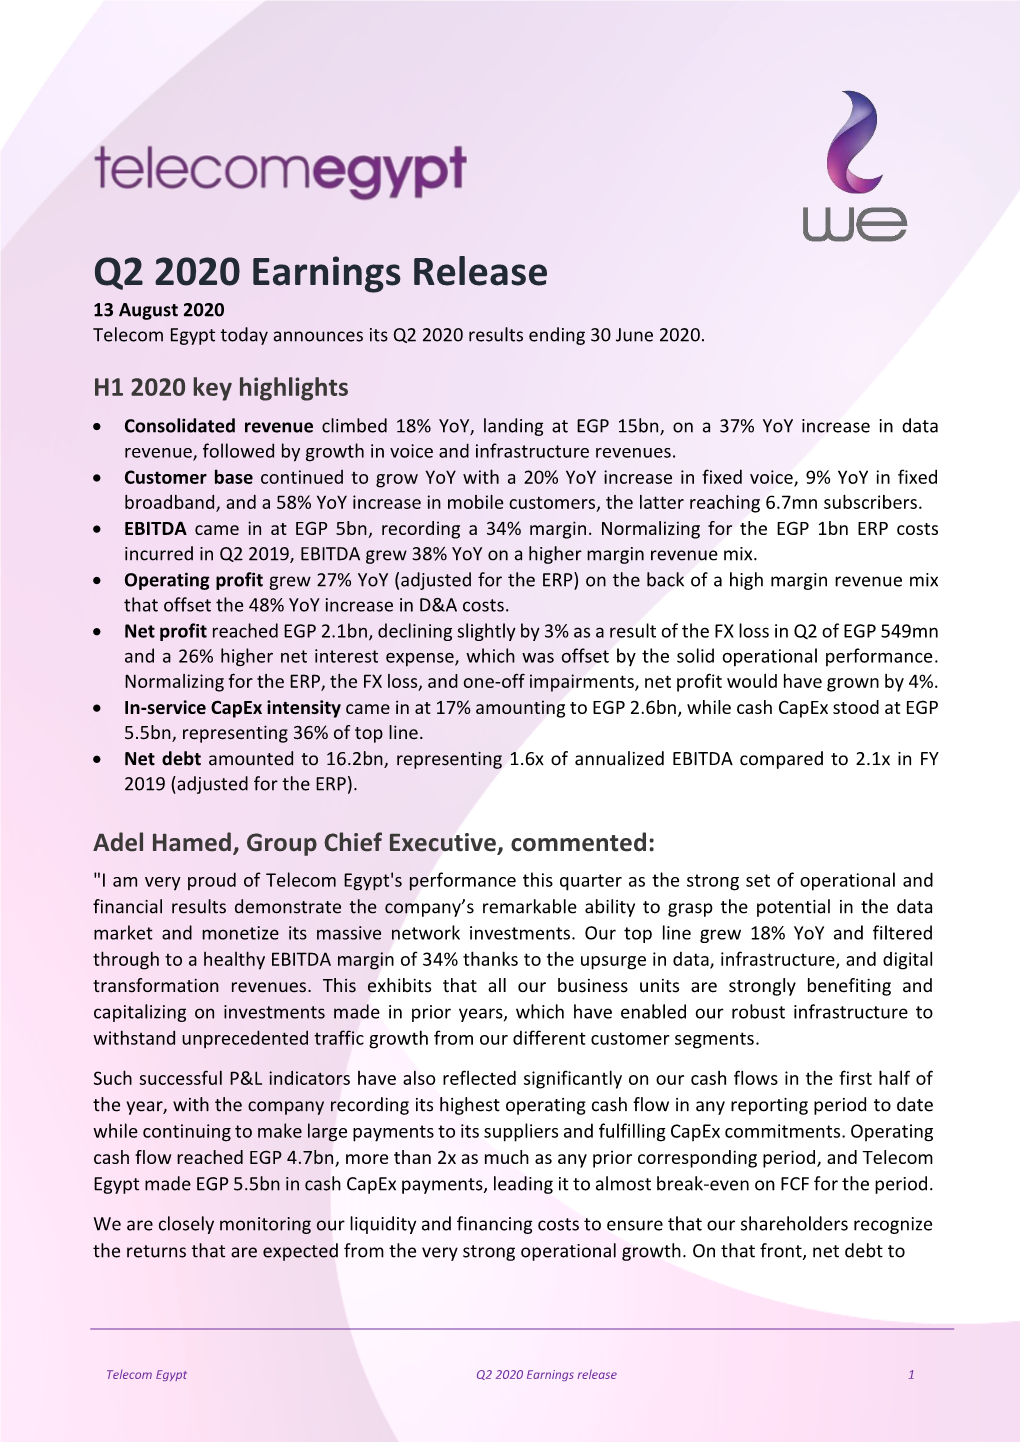 Q2 2020 Earnings Release 13 August 2020 Telecom Egypt Today Announces Its Q2 2020 Results Ending 30 June 2020